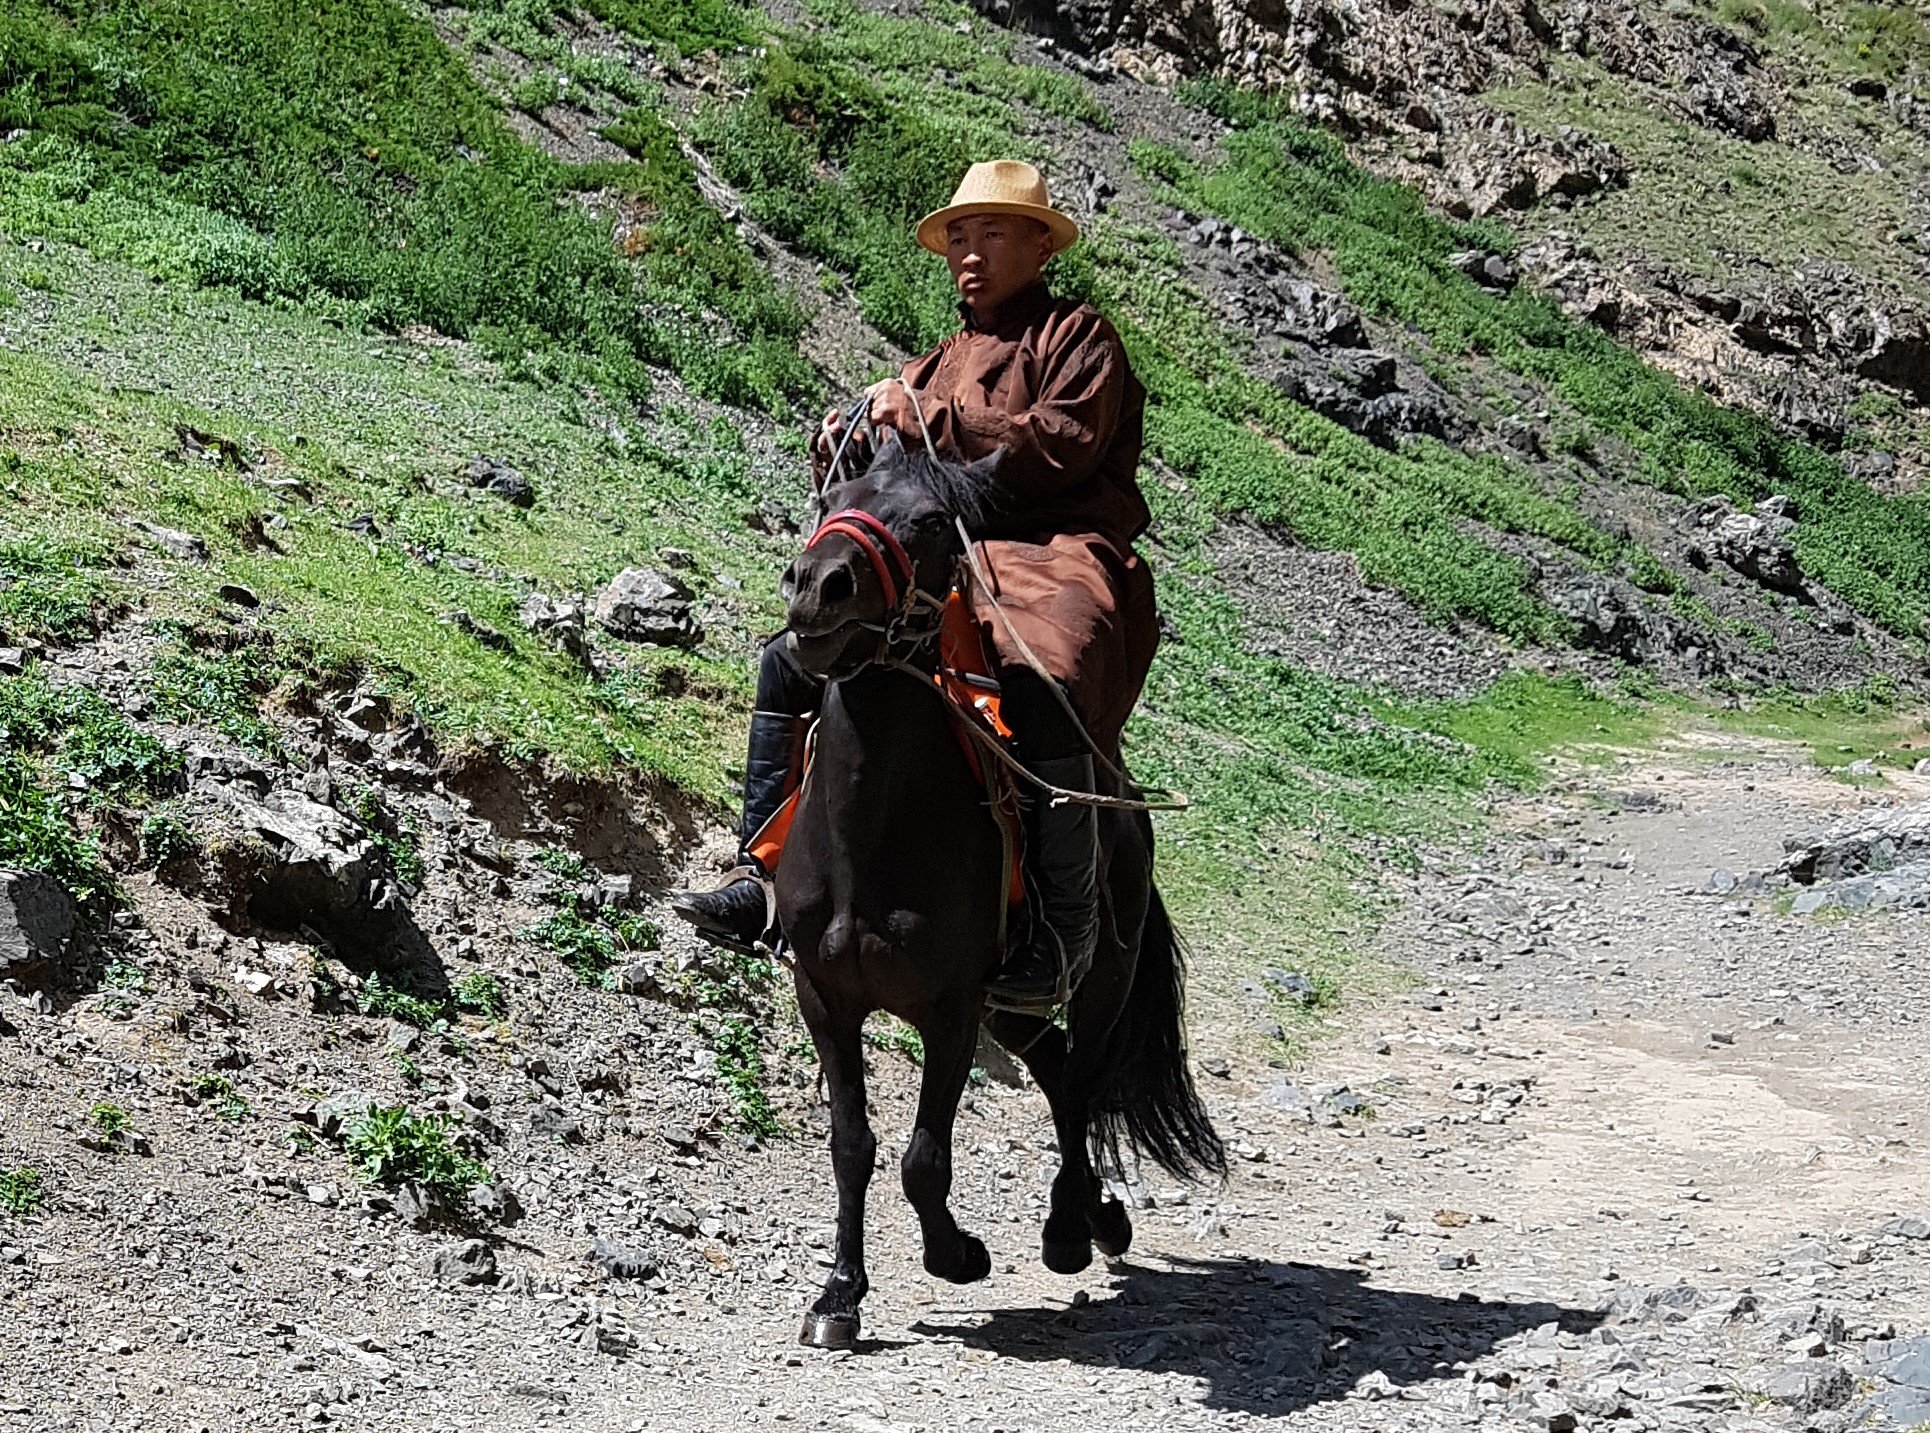 A lonely herder on his horse in the Yolo gorge